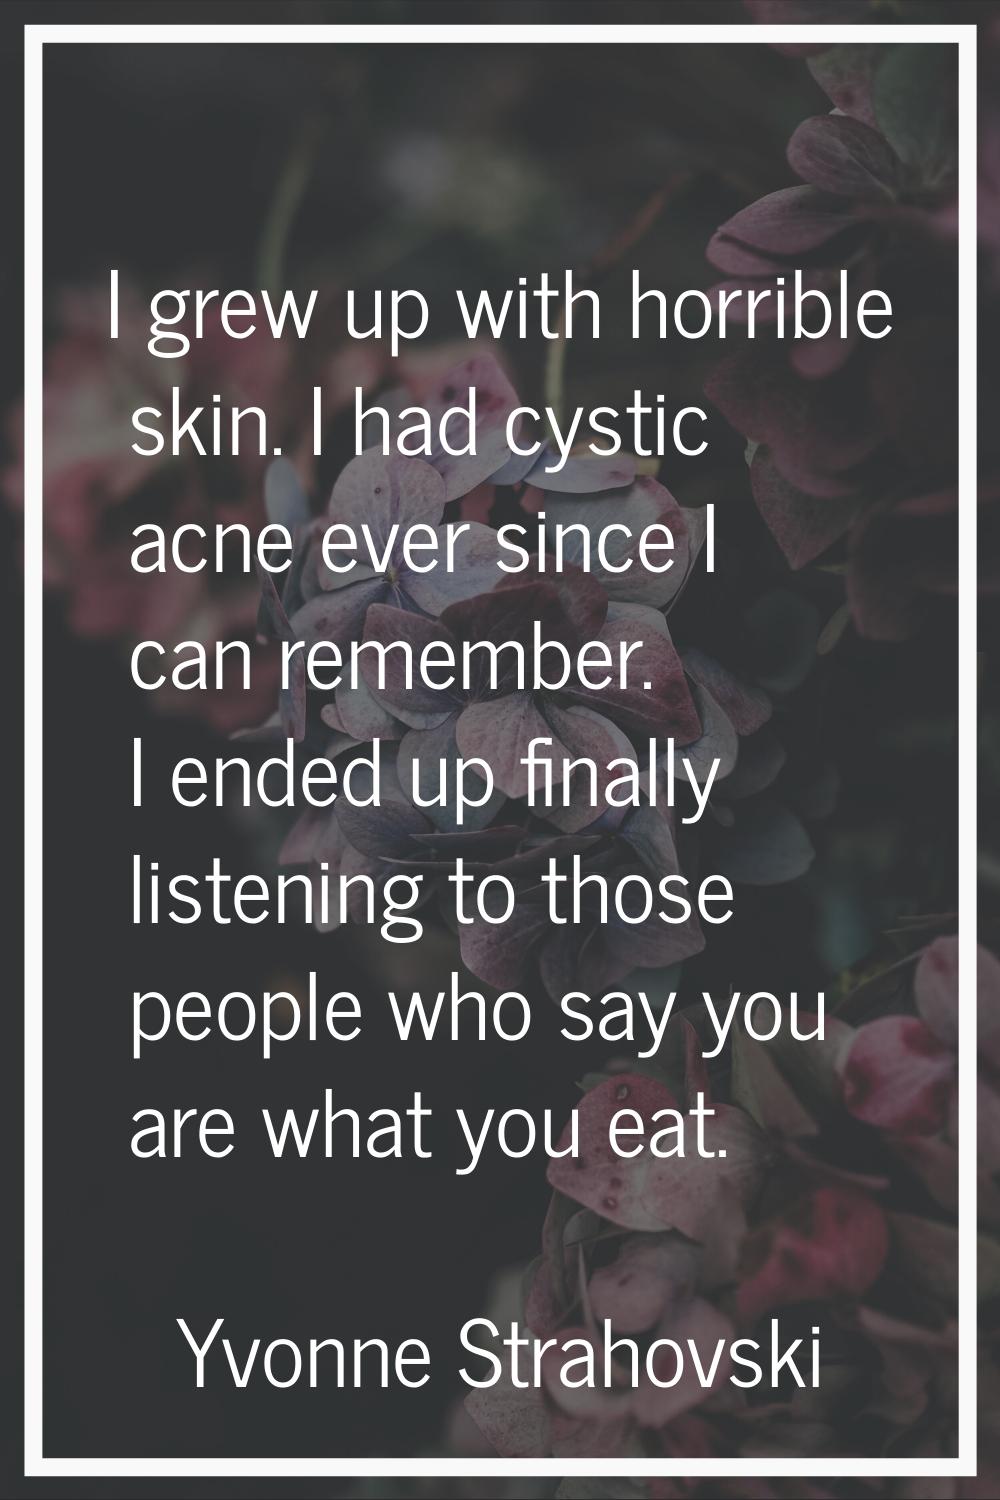 I grew up with horrible skin. I had cystic acne ever since I can remember. I ended up finally liste